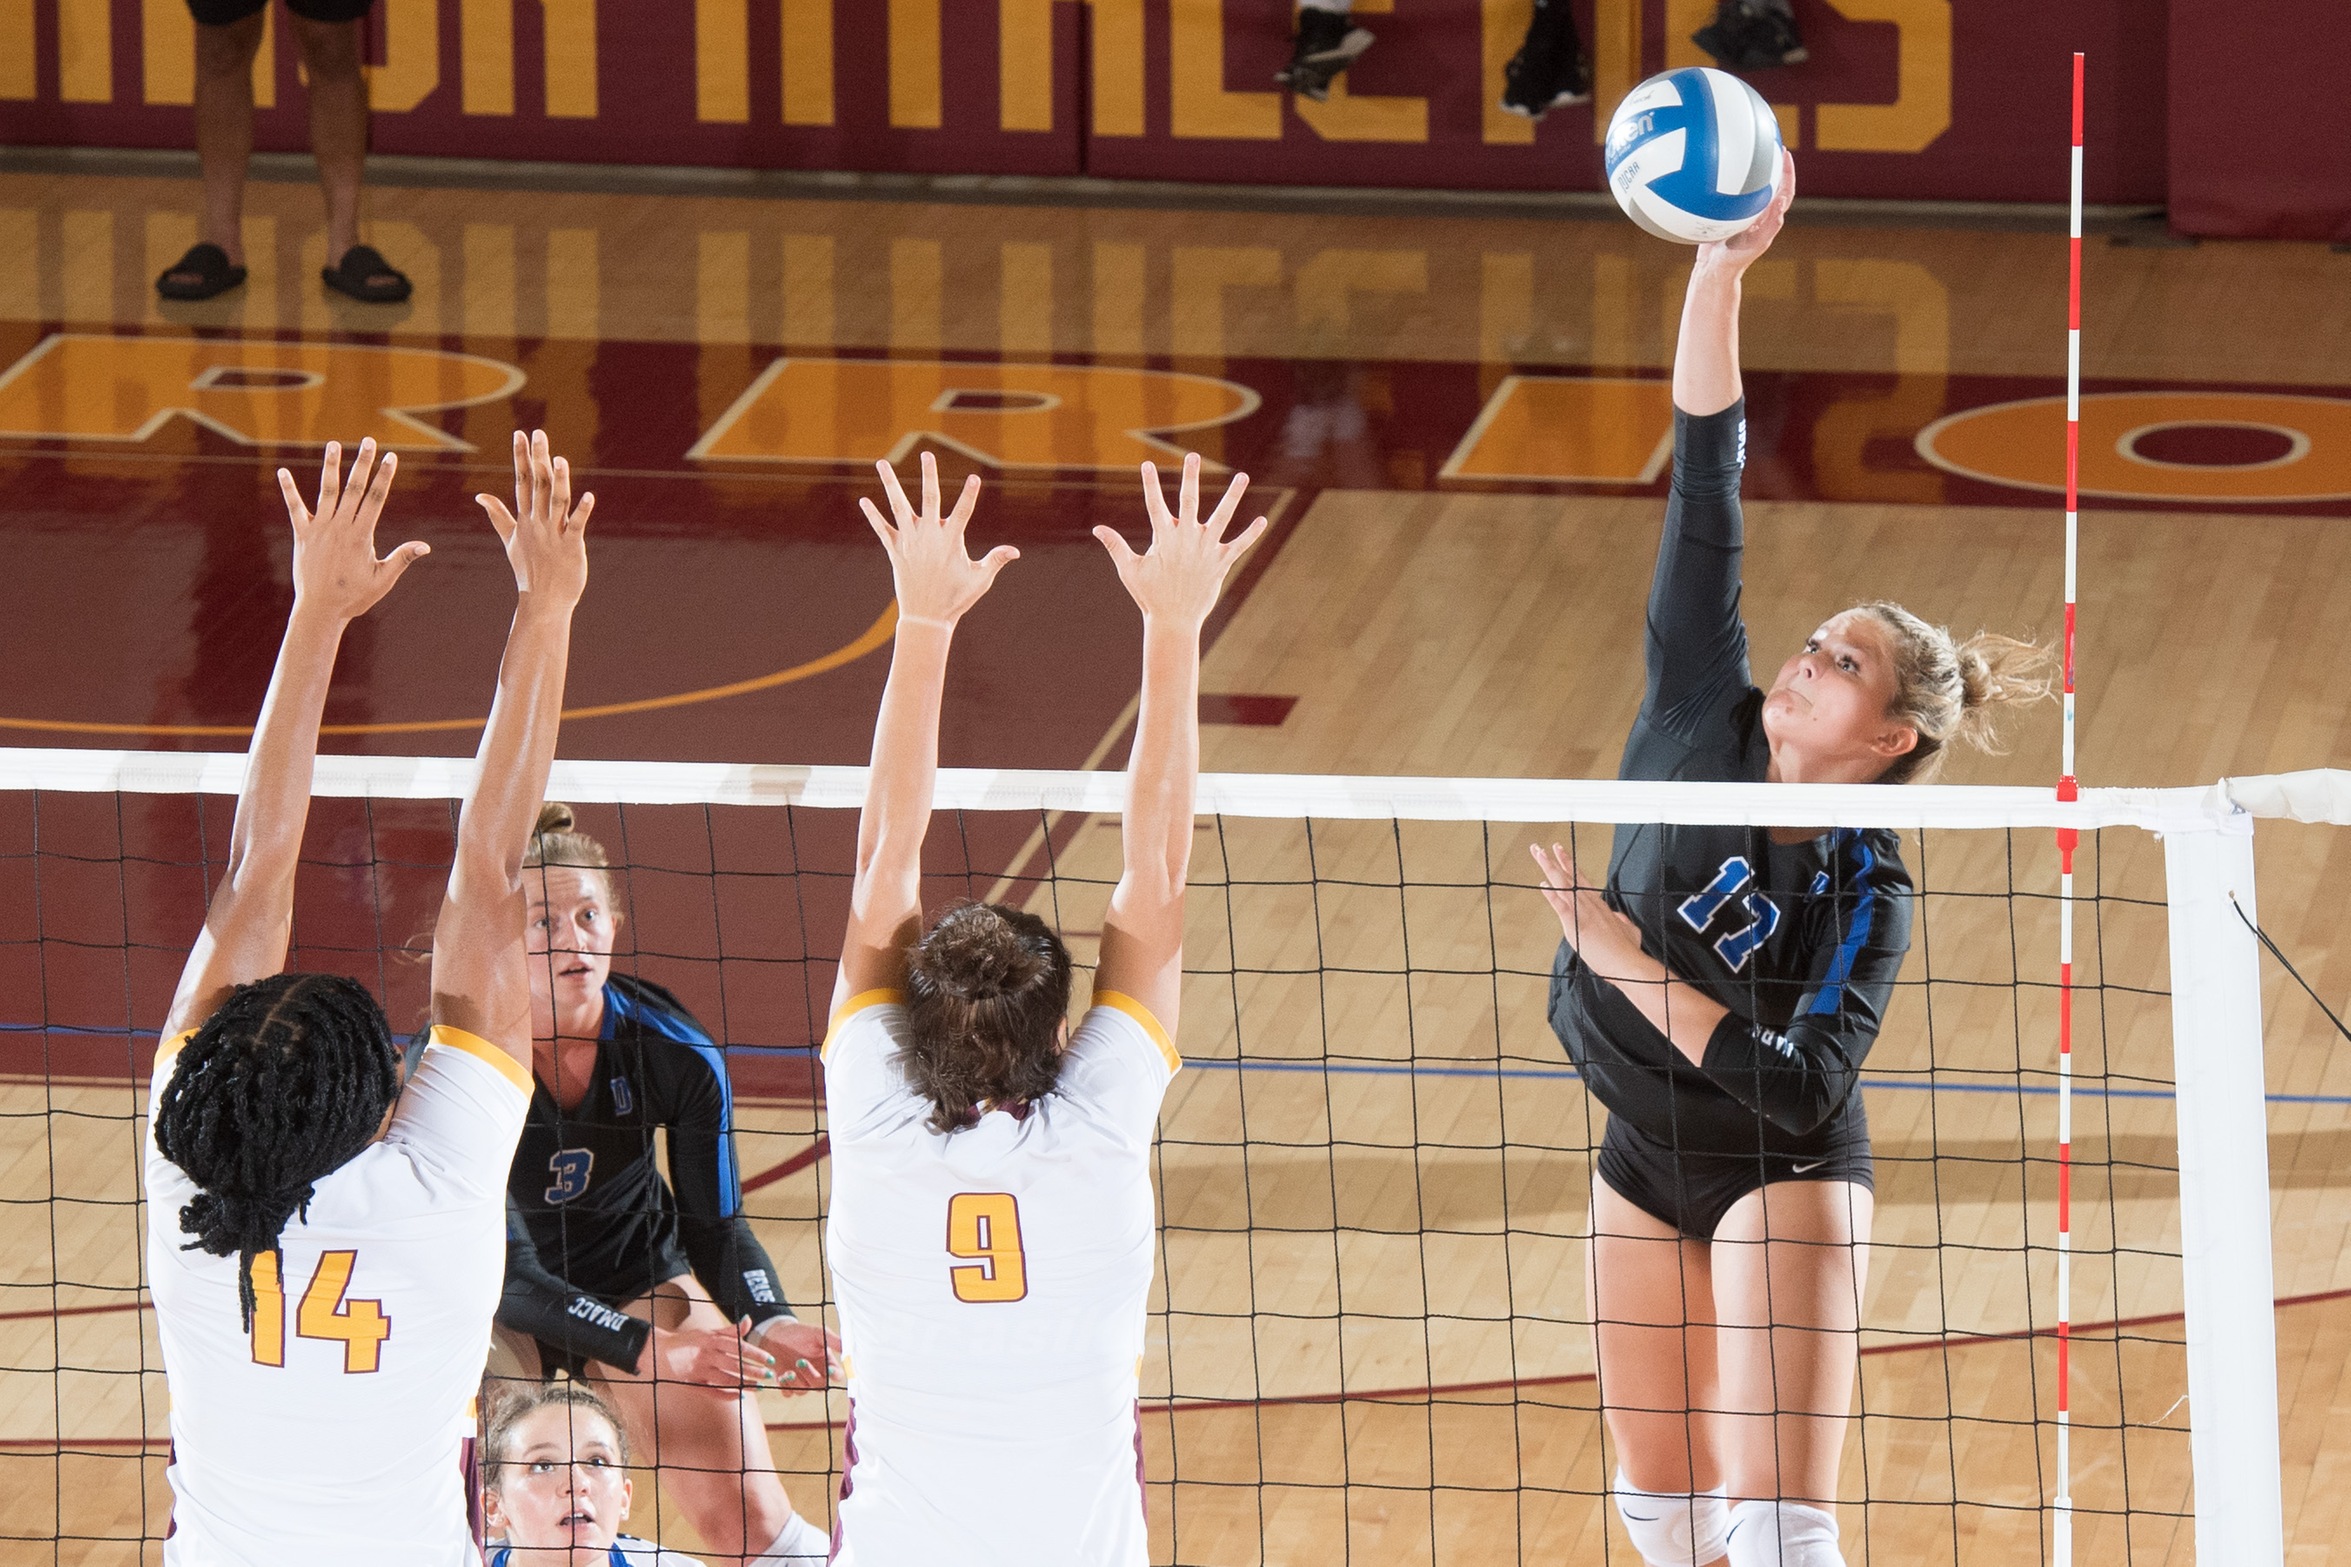 DMACC volleyball team falls to IHCC, defeats SWCC